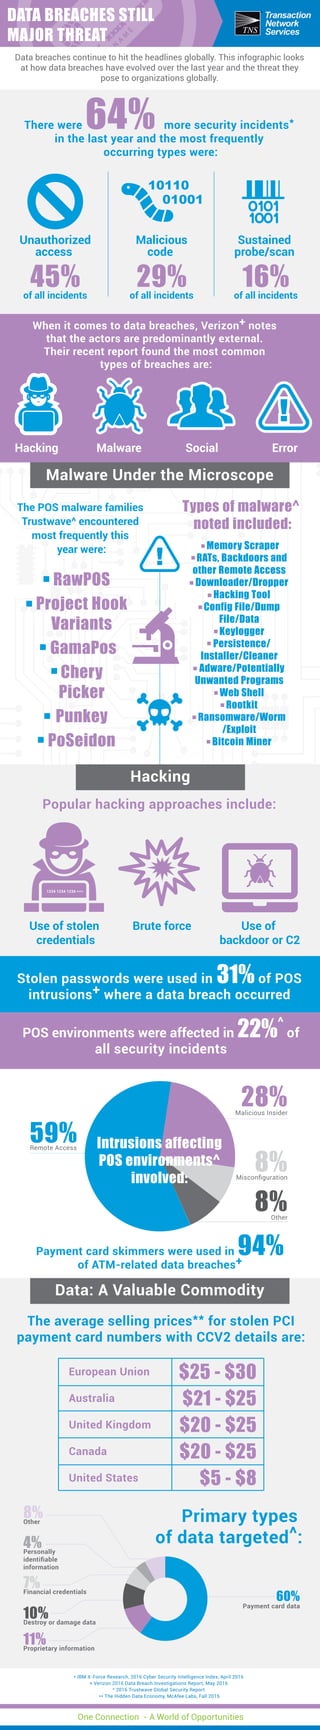 45%of all incidents
Popular hacking approaches include:
Payment card skimmers were used in 94%
of ATM-related data breaches+
Stolen passwords were used in 31% of POS
intrusions+ where a data breach occurred
POS environments were affected in 22%^
of
all security incidents
The average selling prices** for stolen PCI
payment card numbers with CCV2 details are:
Malware Under the Microscope
Data: A Valuable Commodity
Hacking
* IBM X-Force Research, 2016 Cyber Security Intelligence Index, April 2016
+ Verizon 2016 Data Breach Investigations Report, May 2016
^ 2016 Trustwave Global Security Report
** The Hidden Data Economy, McAfee Labs, Fall 2015
There were 64% more security incidents*
in the last year and the most frequently
occurring types were:
Unauthorized
access
The POS malware families
Trustwave^ encountered
most frequently this
year were:
Types of malware^
noted included:
29%of all incidents
Malicious
code
16%of all incidents
Sustained
probe/scan
Hacking
Use of stolen
credentials
Use of
backdoor or C2
Brute force
Malware Social Error
When it comes to data breaches, Verizon+ notes
that the actors are predominantly external.
Their recent report found the most common
types of breaches are:
RawPOS
Project Hook
Variants
GamaPos
Chery
Picker
Punkey
PoSeidon
- Memory Scraper
- RATs, Backdoors and
other Remote Access
- Downloader/Dropper
- Hacking Tool
- Config File/Dump
File/Data
- Keylogger
- Persistence/
Installer/Cleaner
- Adware/Potentially
Unwanted Programs
- Web Shell
- Rootkit
- Ransomware/Worm
/Exploit
- Bitcoin Miner
Remote Access
Malicious Insider
Misconﬁguration
Other
59%
28%
8%
8%
Payment card data
60%
Other
8%
Personally
identiﬁable
information
4%
Financial credentials
7%
Destroy or damage data
10%
Proprietary information
11%
Intrusions affecting
POS environments^
involved:
$25 - $30
$21 - $25
$20 - $25
$20 - $25
$5 - $8
European Union
Australia
United Kingdom
Canada
United States
Primary types
of data targeted^:
1234 1234 1234 ****
Data breaches continue to hit the headlines globally. This infographic looks
at how data breaches have evolved over the last year and the threat they
pose to organizations globally.
DATA BREACHES STILL
MAJOR THREAT
One Connection - A World of Opportunities
 